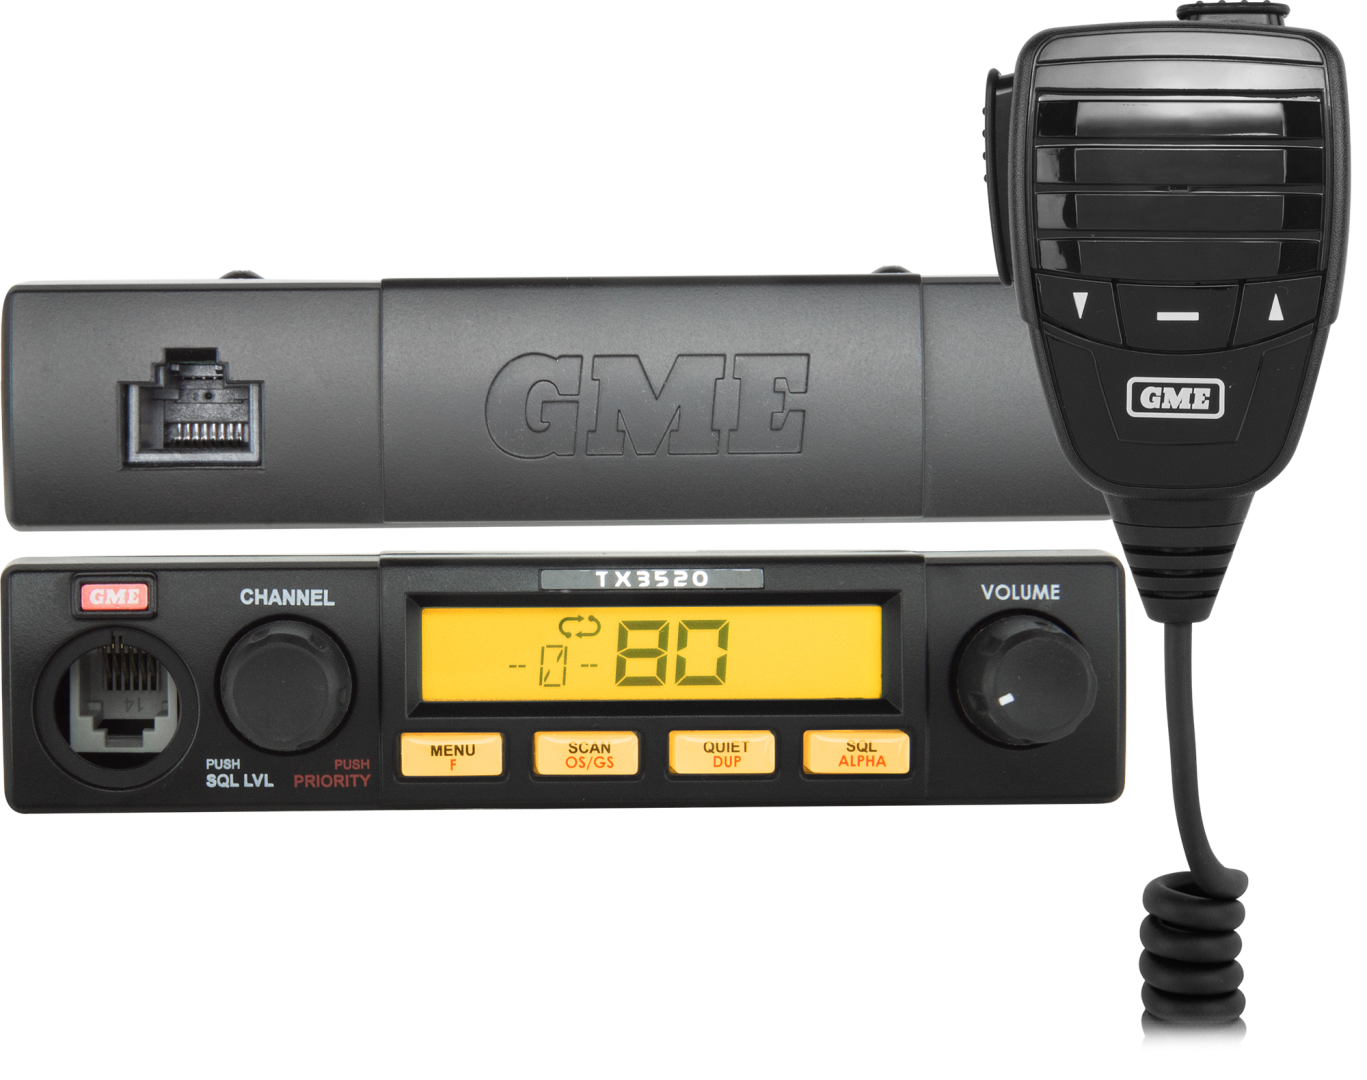 5 Watt, Compact Fully Featured Remote Mount Uhf Cb Radio With Scansuite